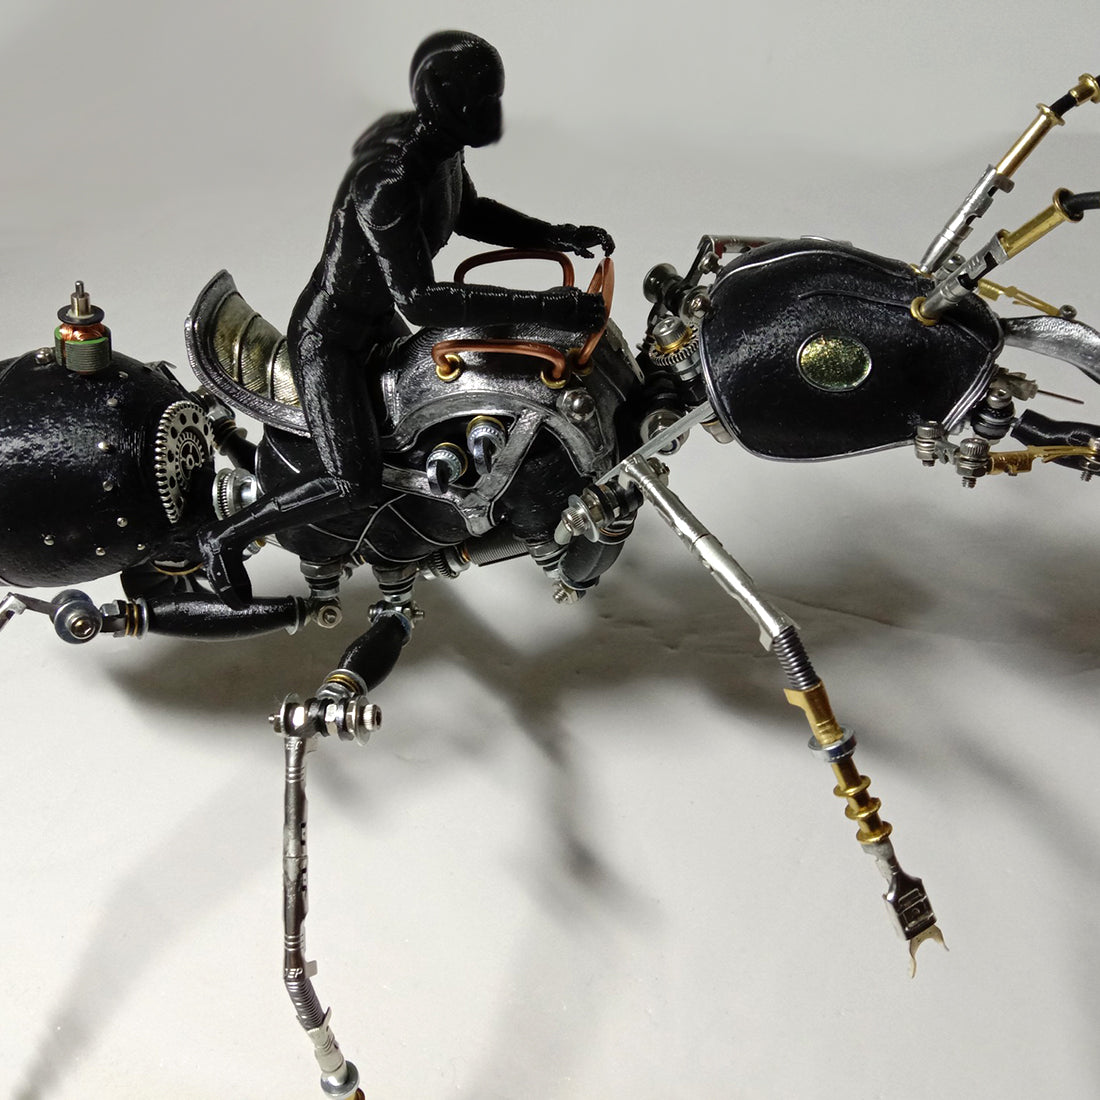 Steampunk Worker Ant with Saddle 3D Metal Model Kits Assembled Insect Sculpture  Assembly